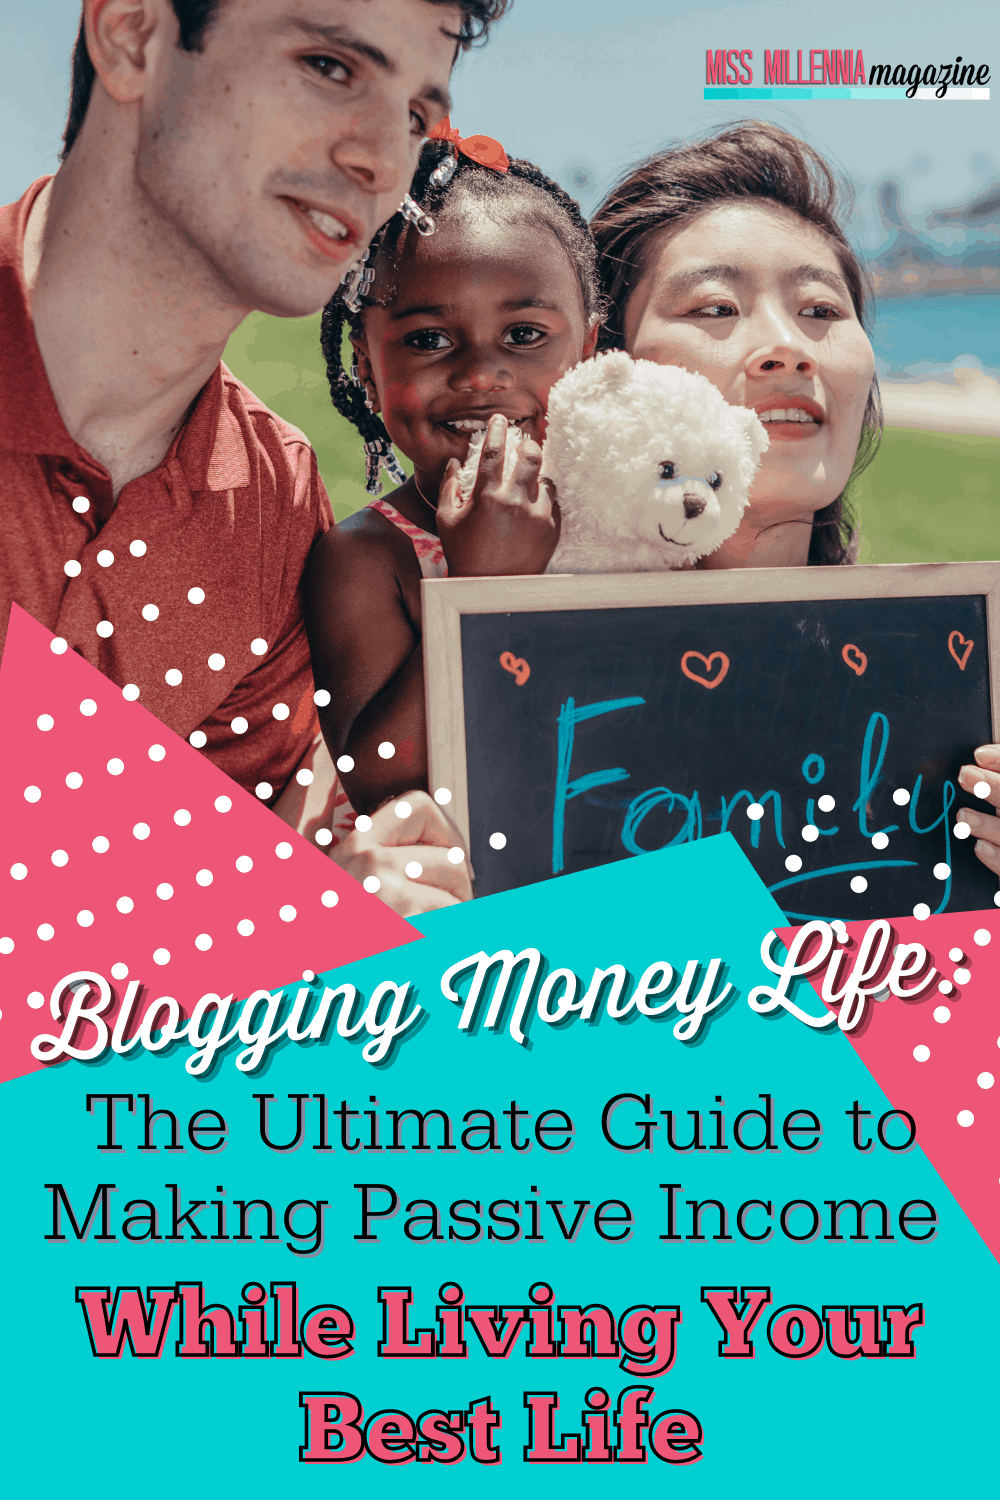 Blogging Money Life: The Ultimate Guide to Making Passive Income